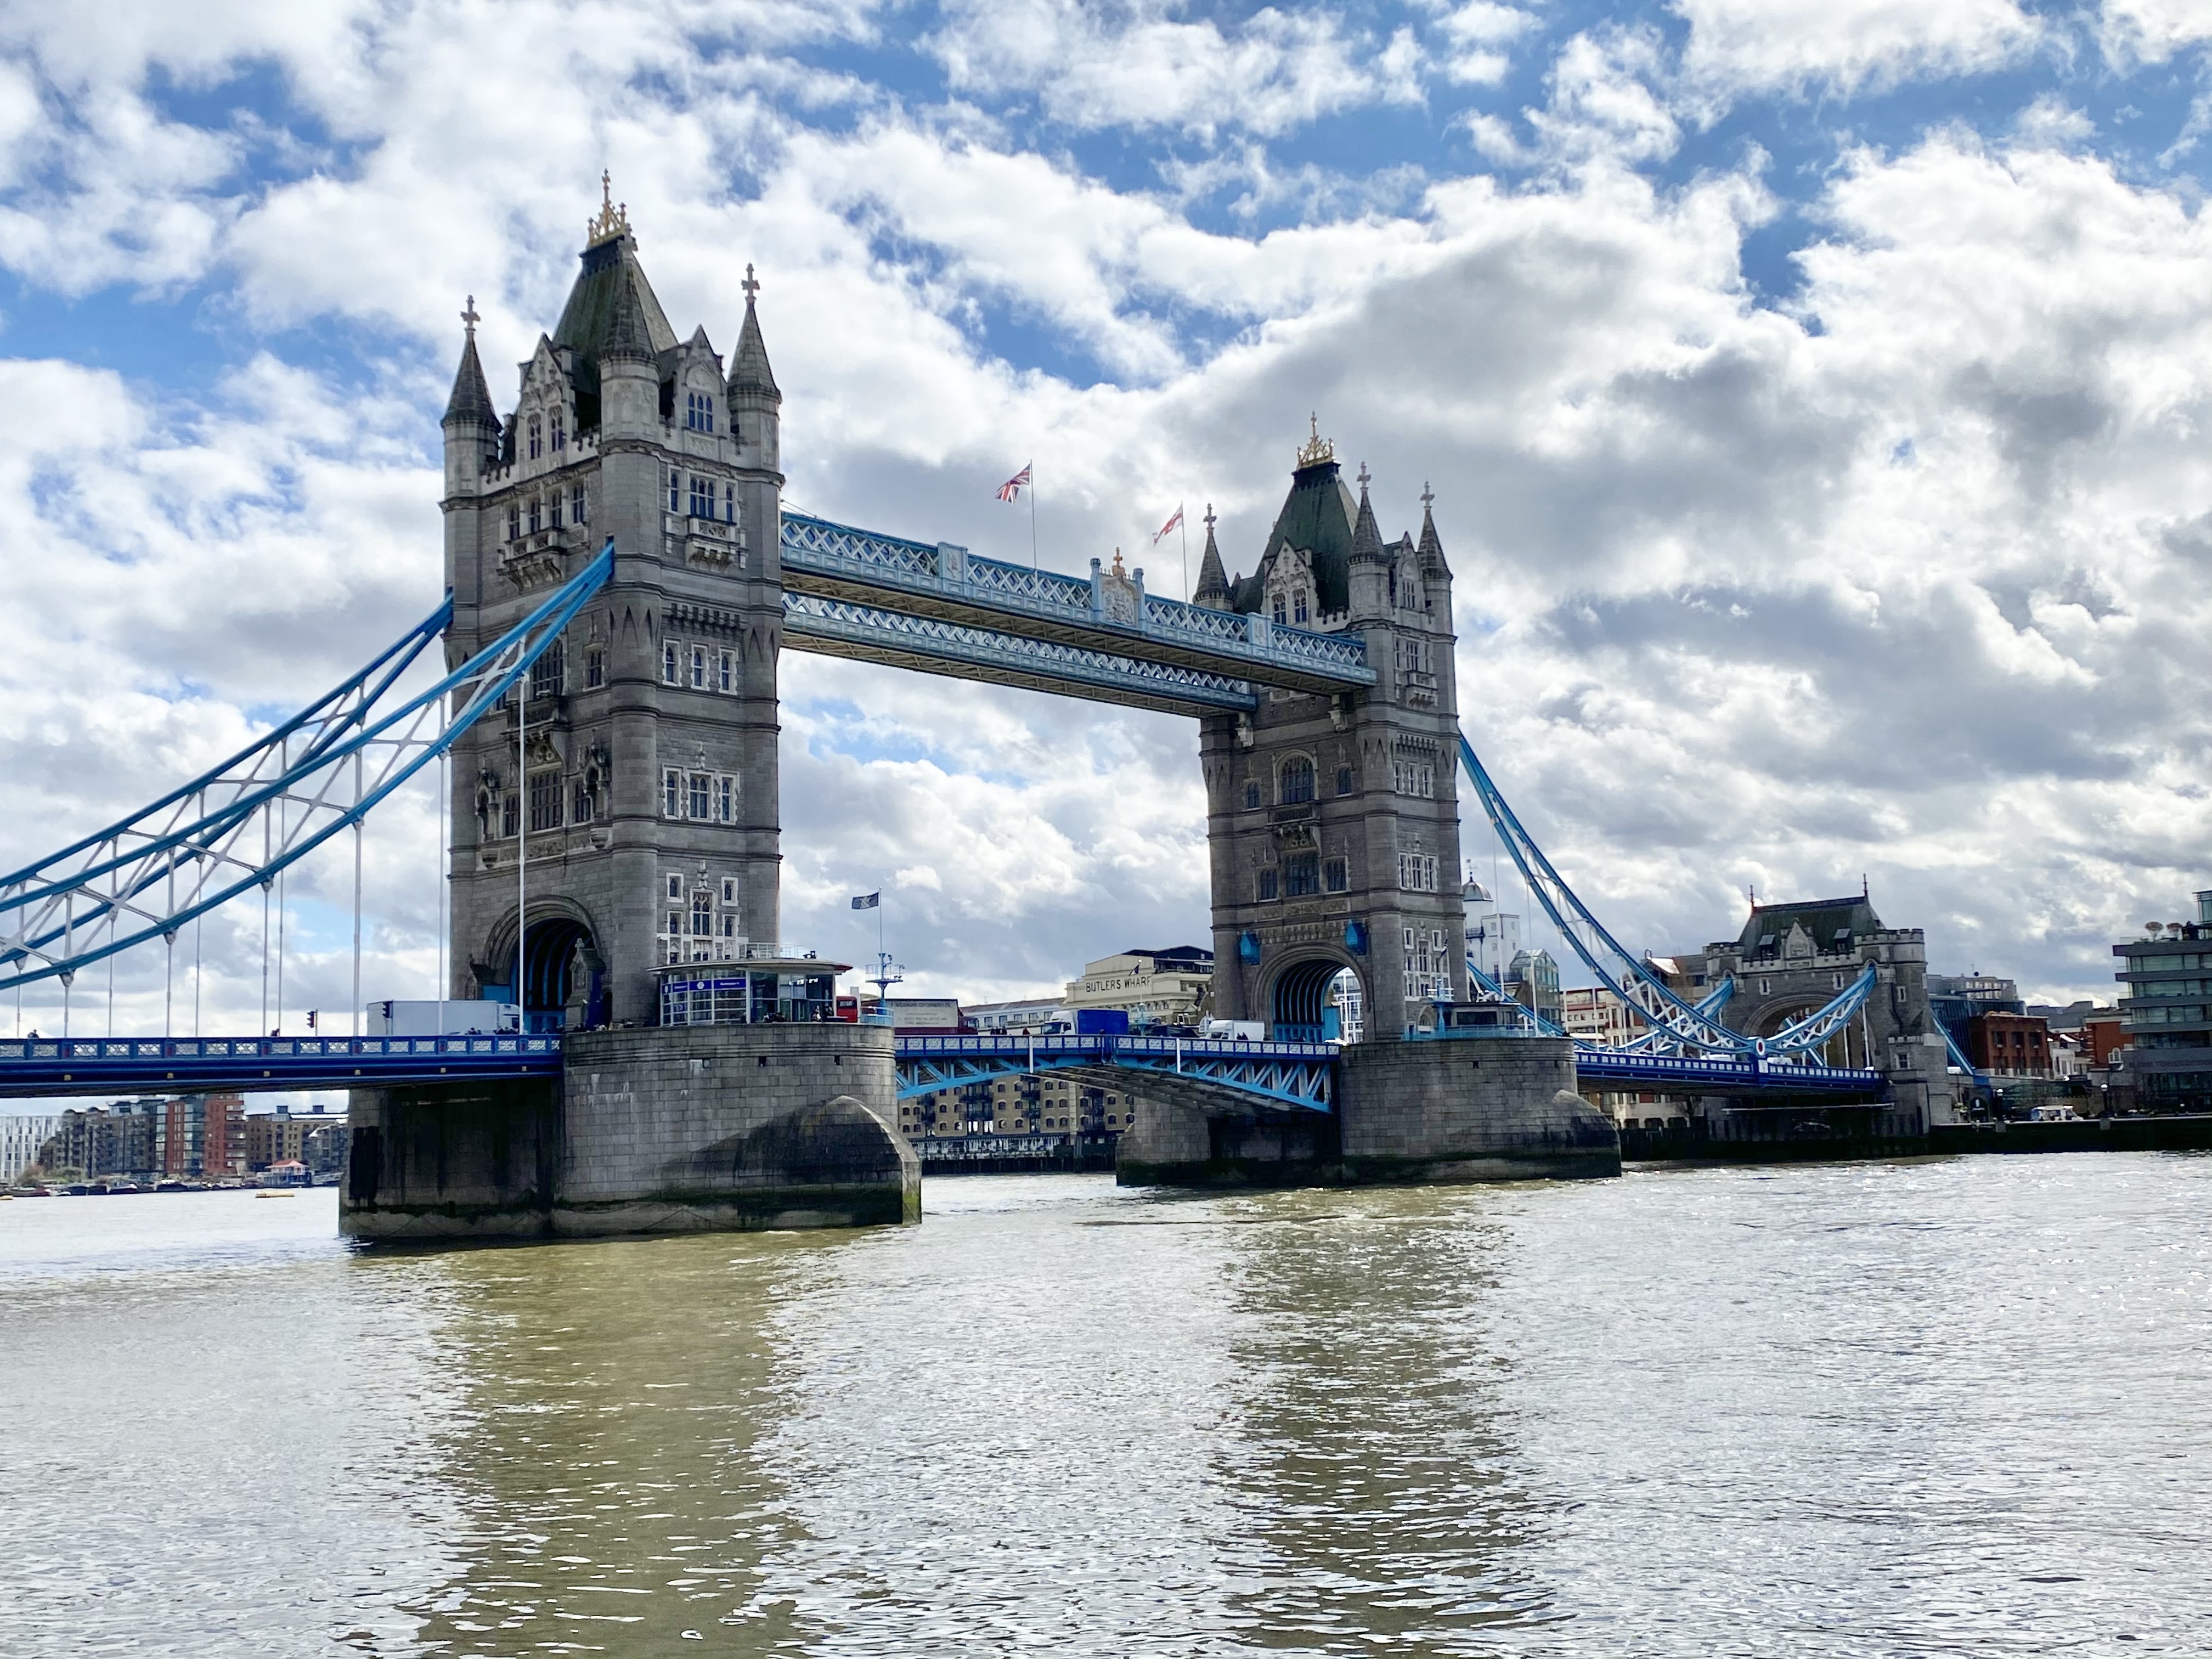 Planning to visit London, England, and wondering what to see? Here's a list of all the things to do and see in London with kids.